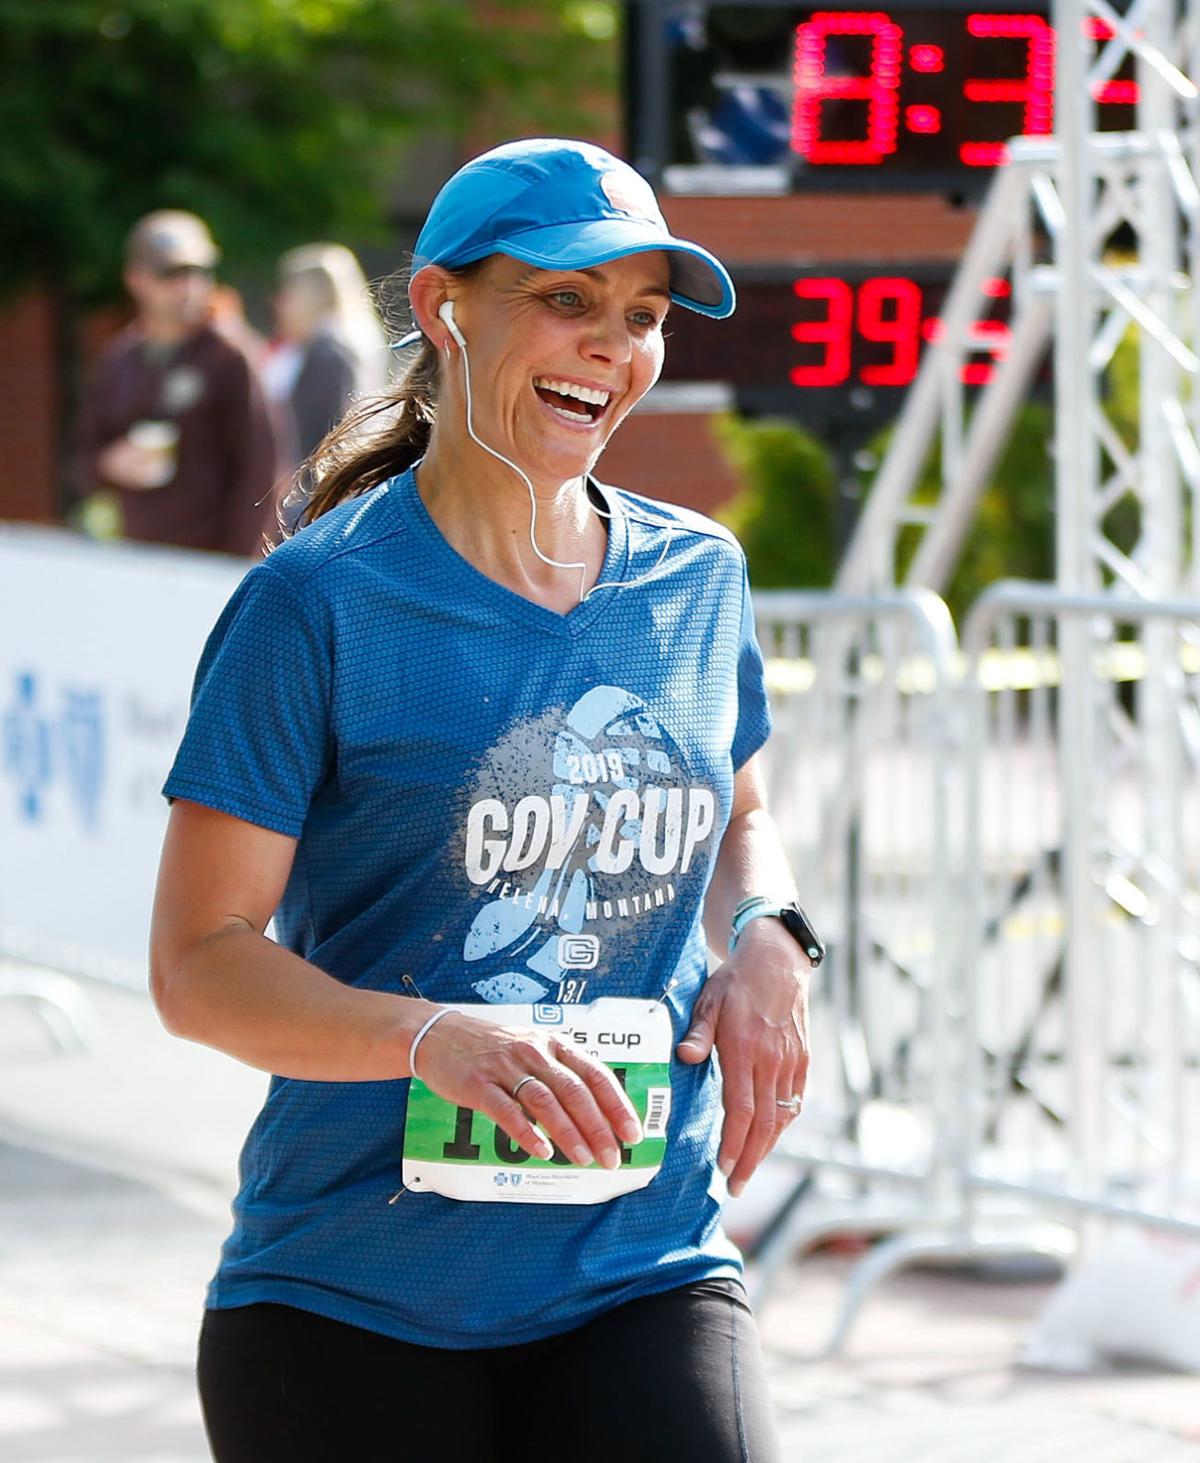 46th Governor's Cup turns Helena into Montana's running mecca